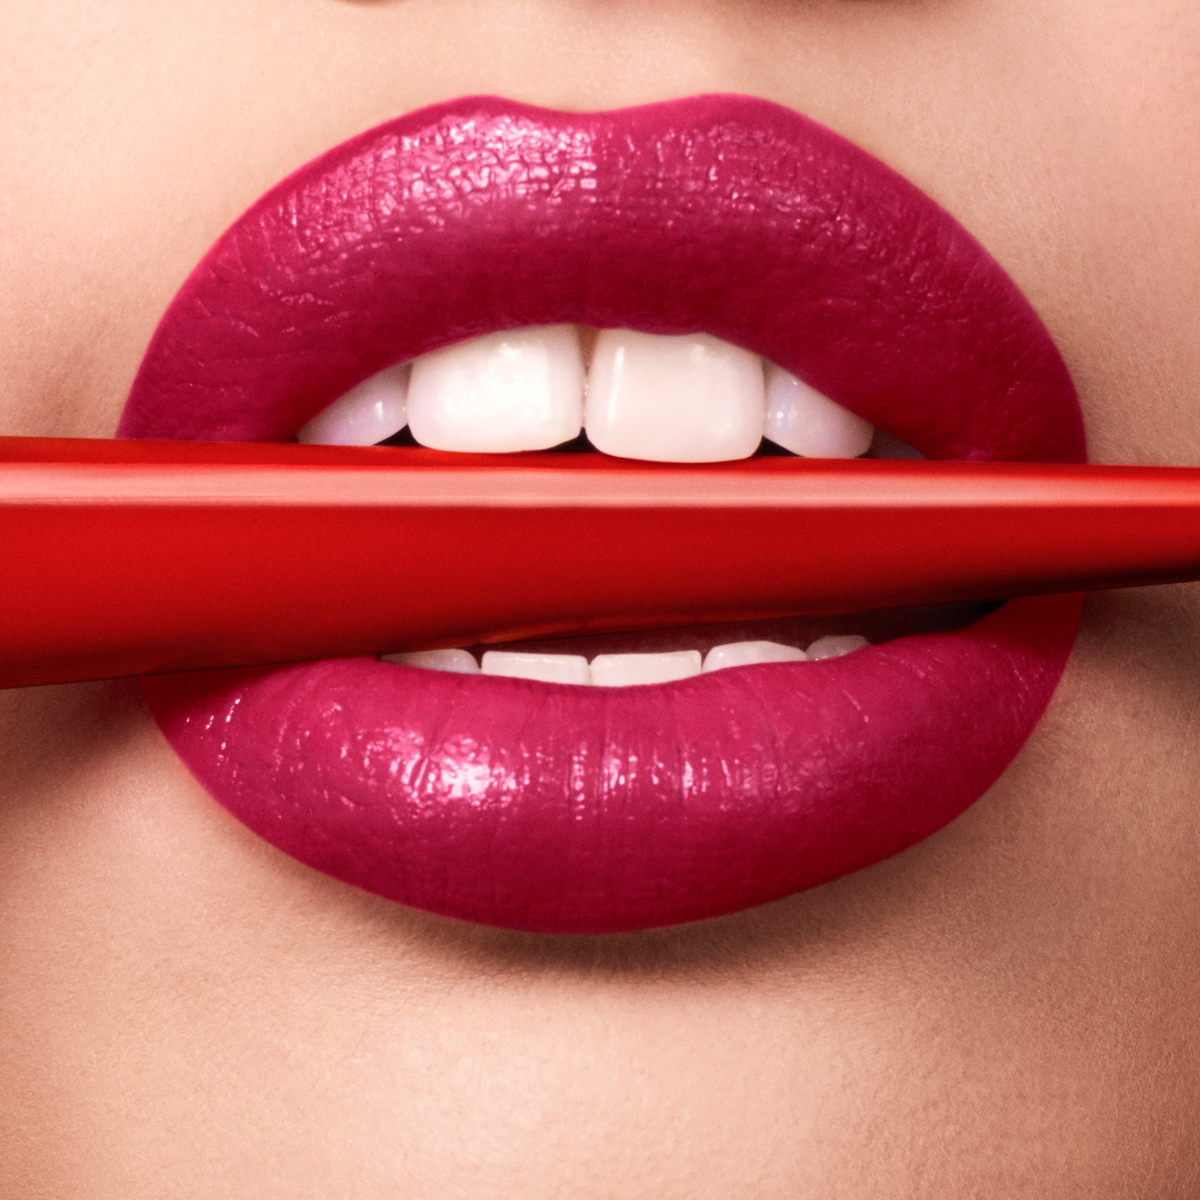 Christian Louboutin Beauty Launches Rouge Stiletto Glossy and